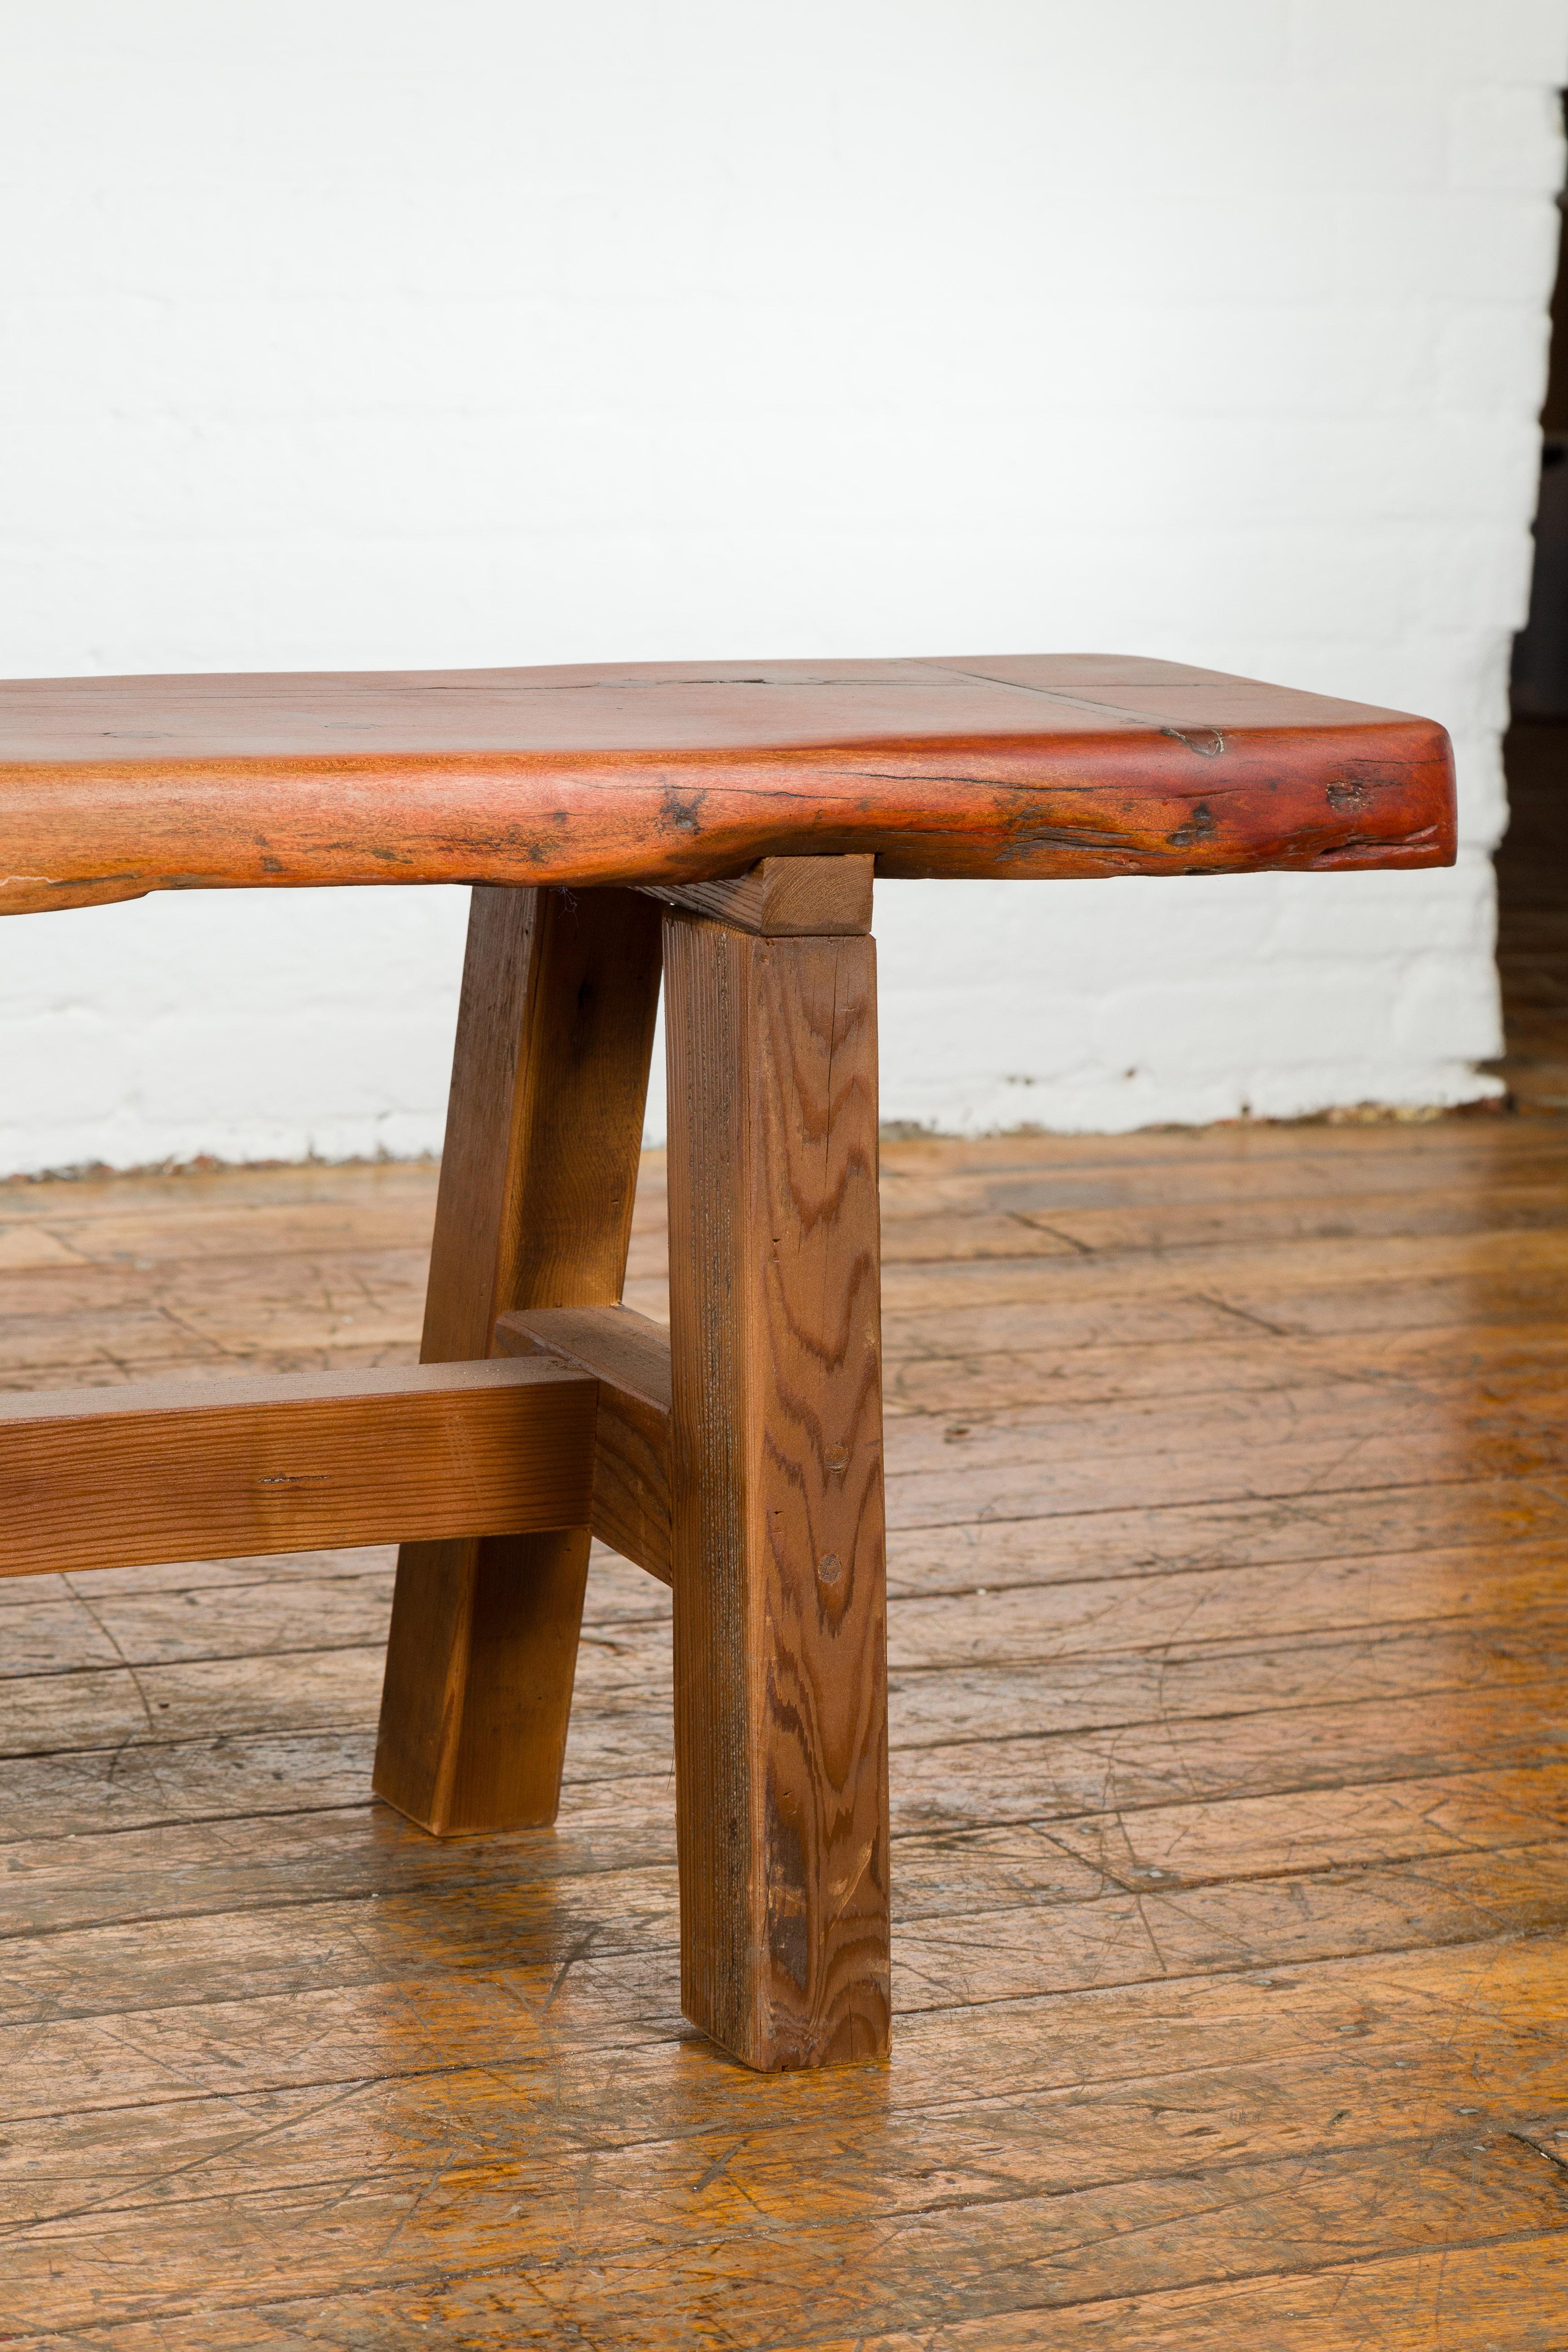 Javanese Mingei Style Rustic A-Frame Wooden Bench Made of Railroad Ties with Stretcher For Sale